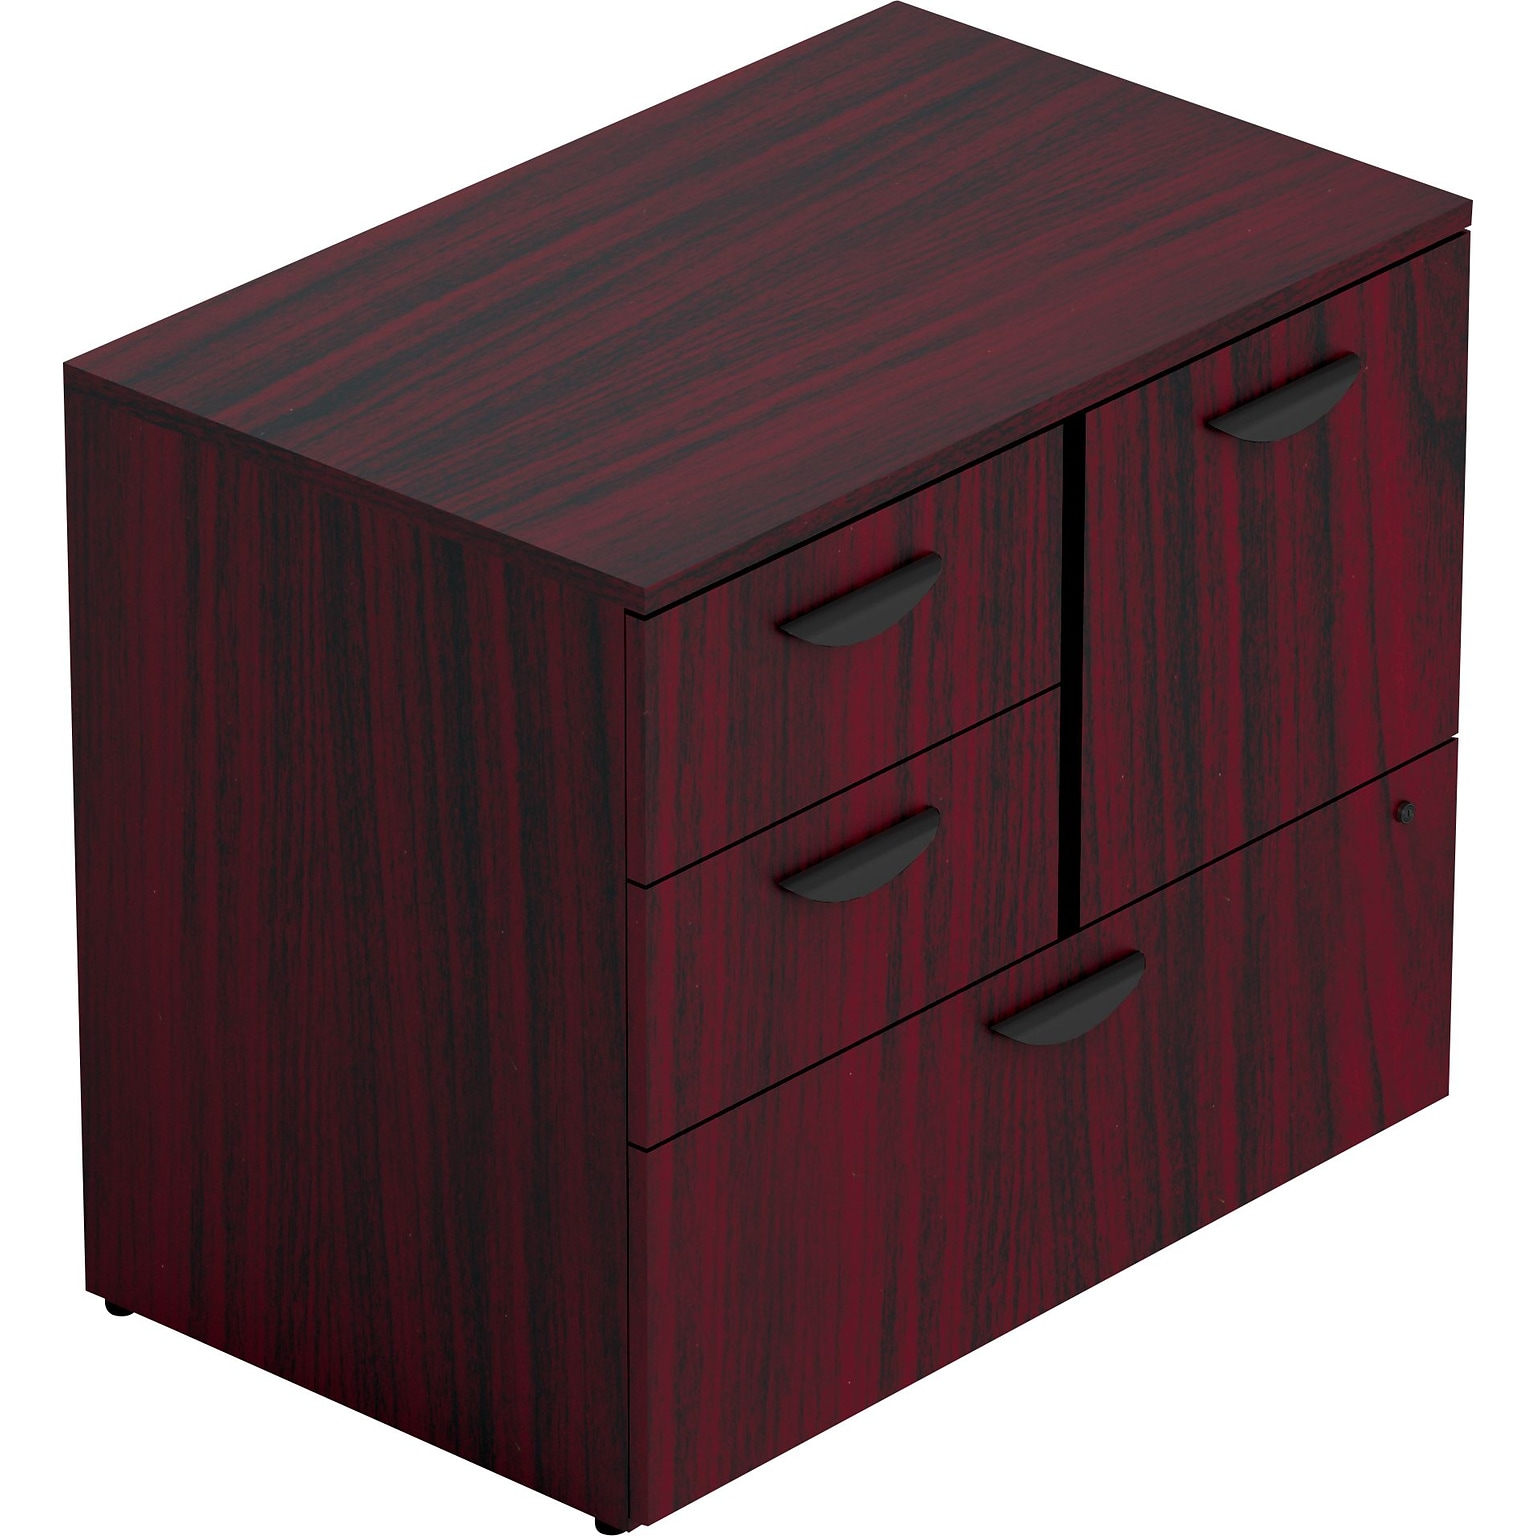 Offices to Go Superior Laminate Mixed Storage Unit with Lock, American Mahogany, 36W x 22D x 29.5H